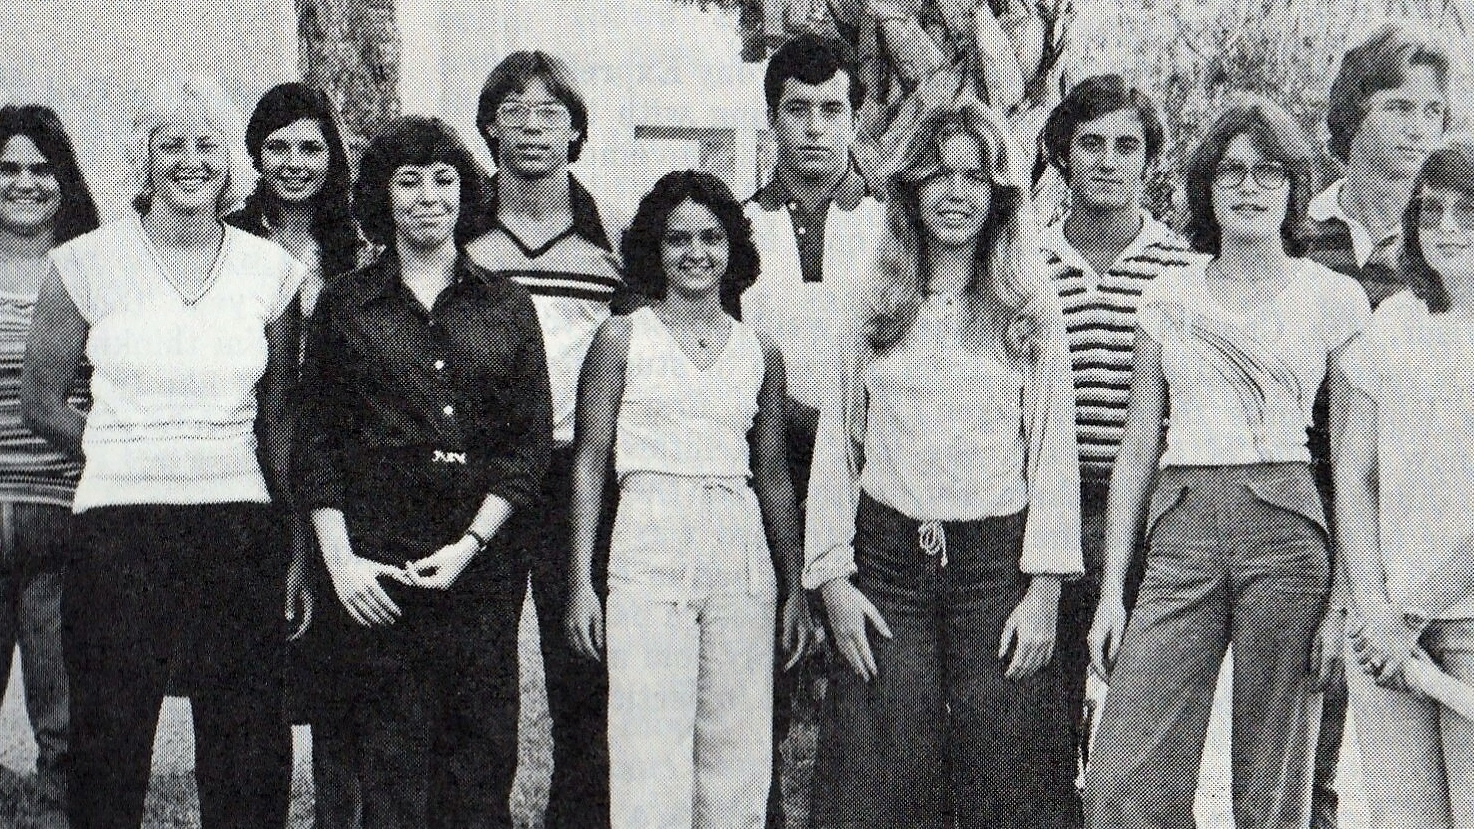 Coral Springs High School’s First Graduating Class To Hold 40th Reunion